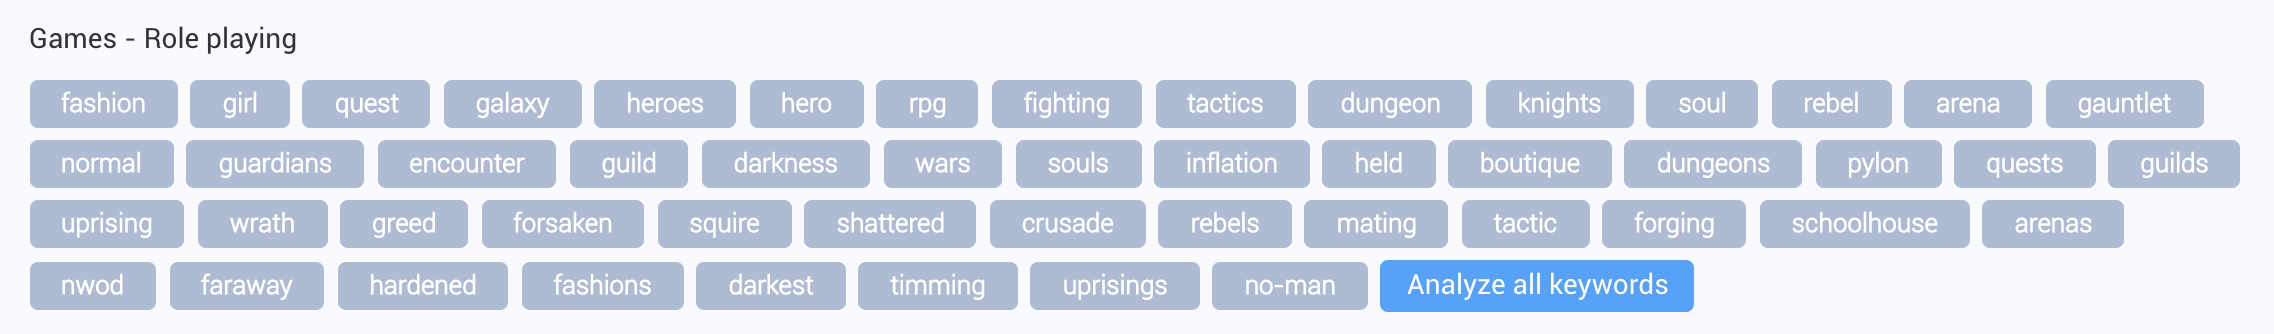 Top category keywords for the Games - Role Playing category (Google Play US)